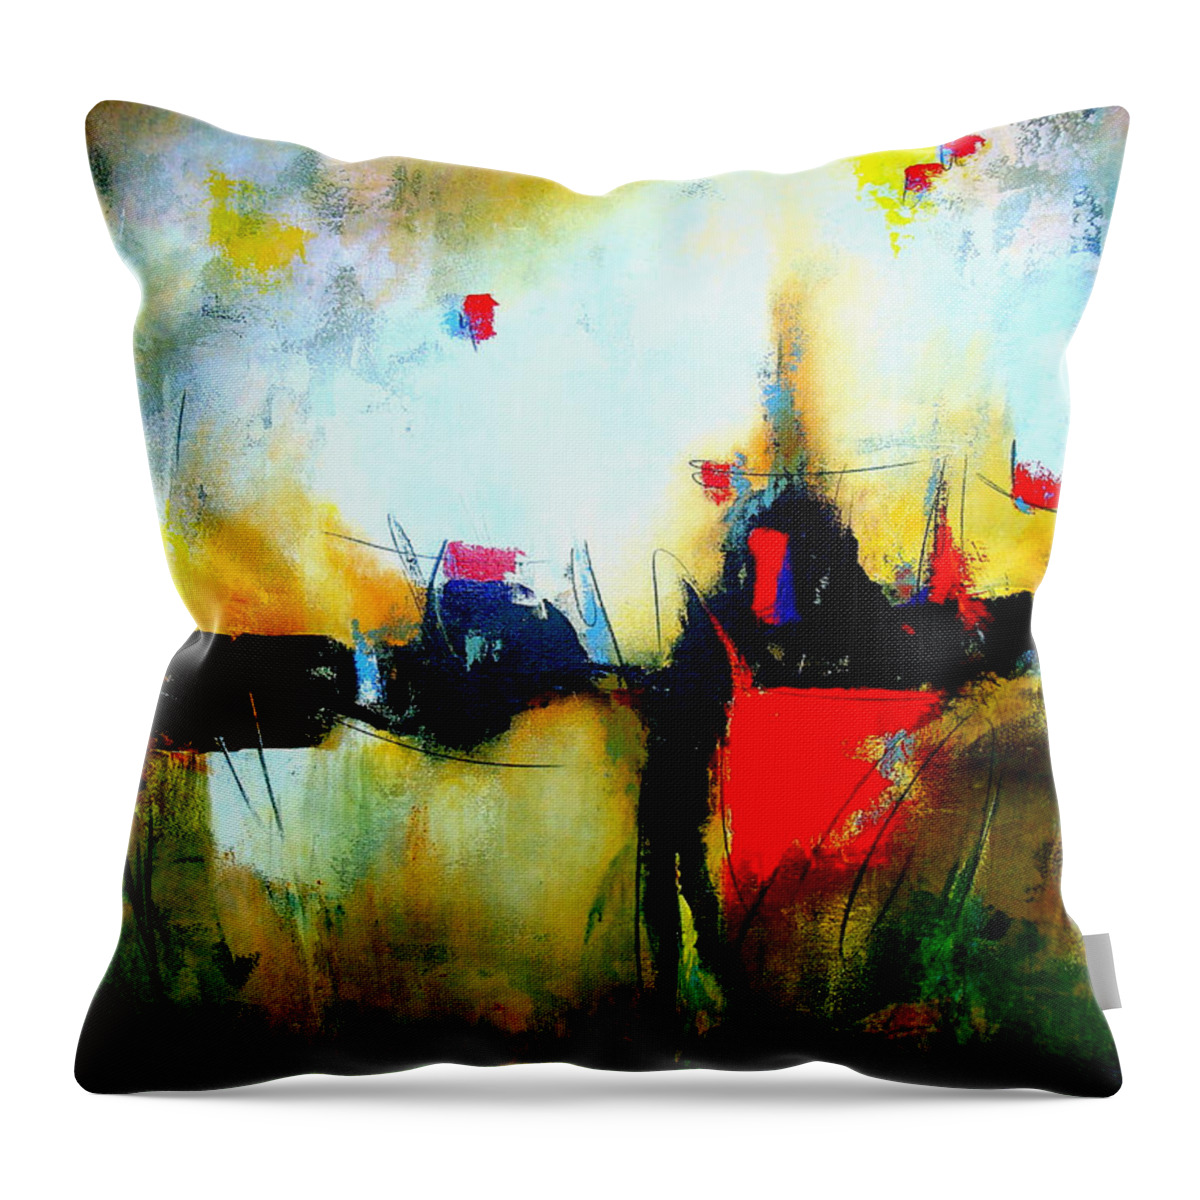 Abstract Throw Pillow featuring the painting Espejismos by Thelma Zambrano